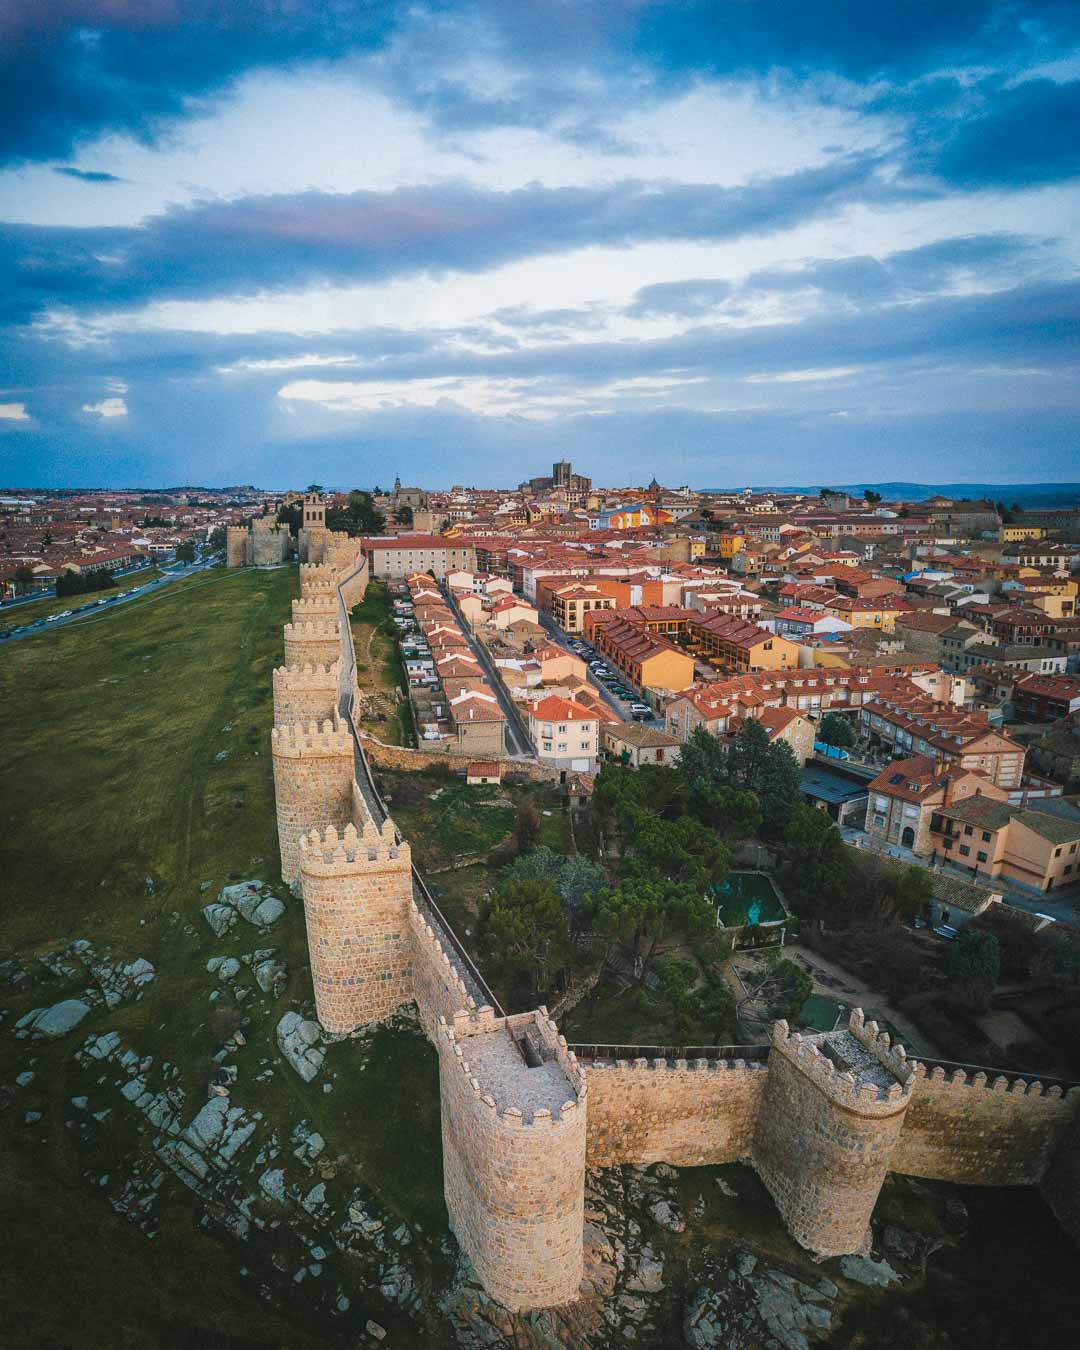 the fortified walls around avila as seen from above